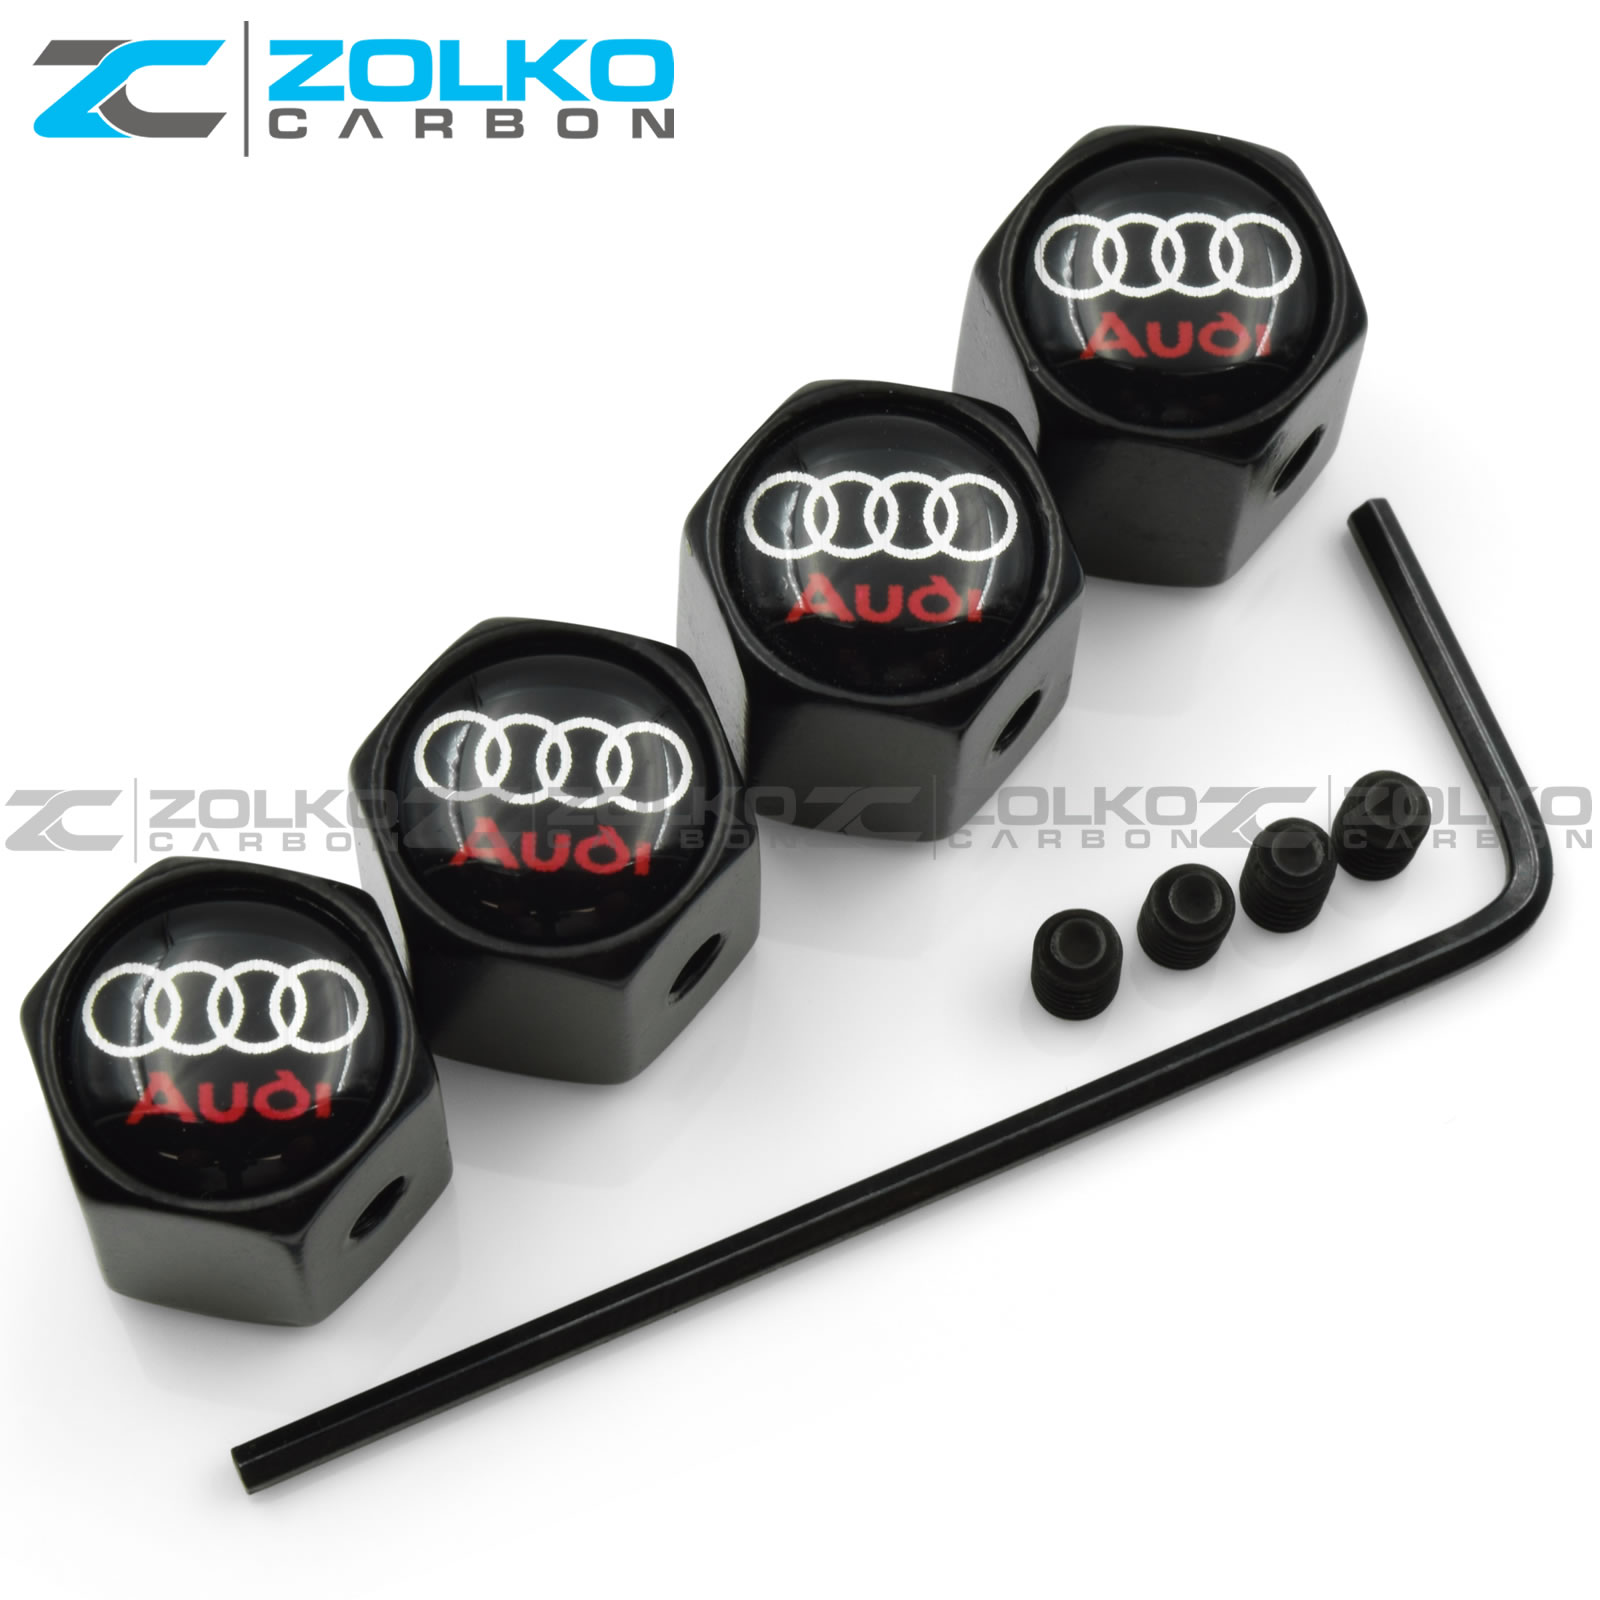 4 X Car Logo Wheel Tire Valve Stems Cap Anti-theft Steal Dust Cover for Audi RS